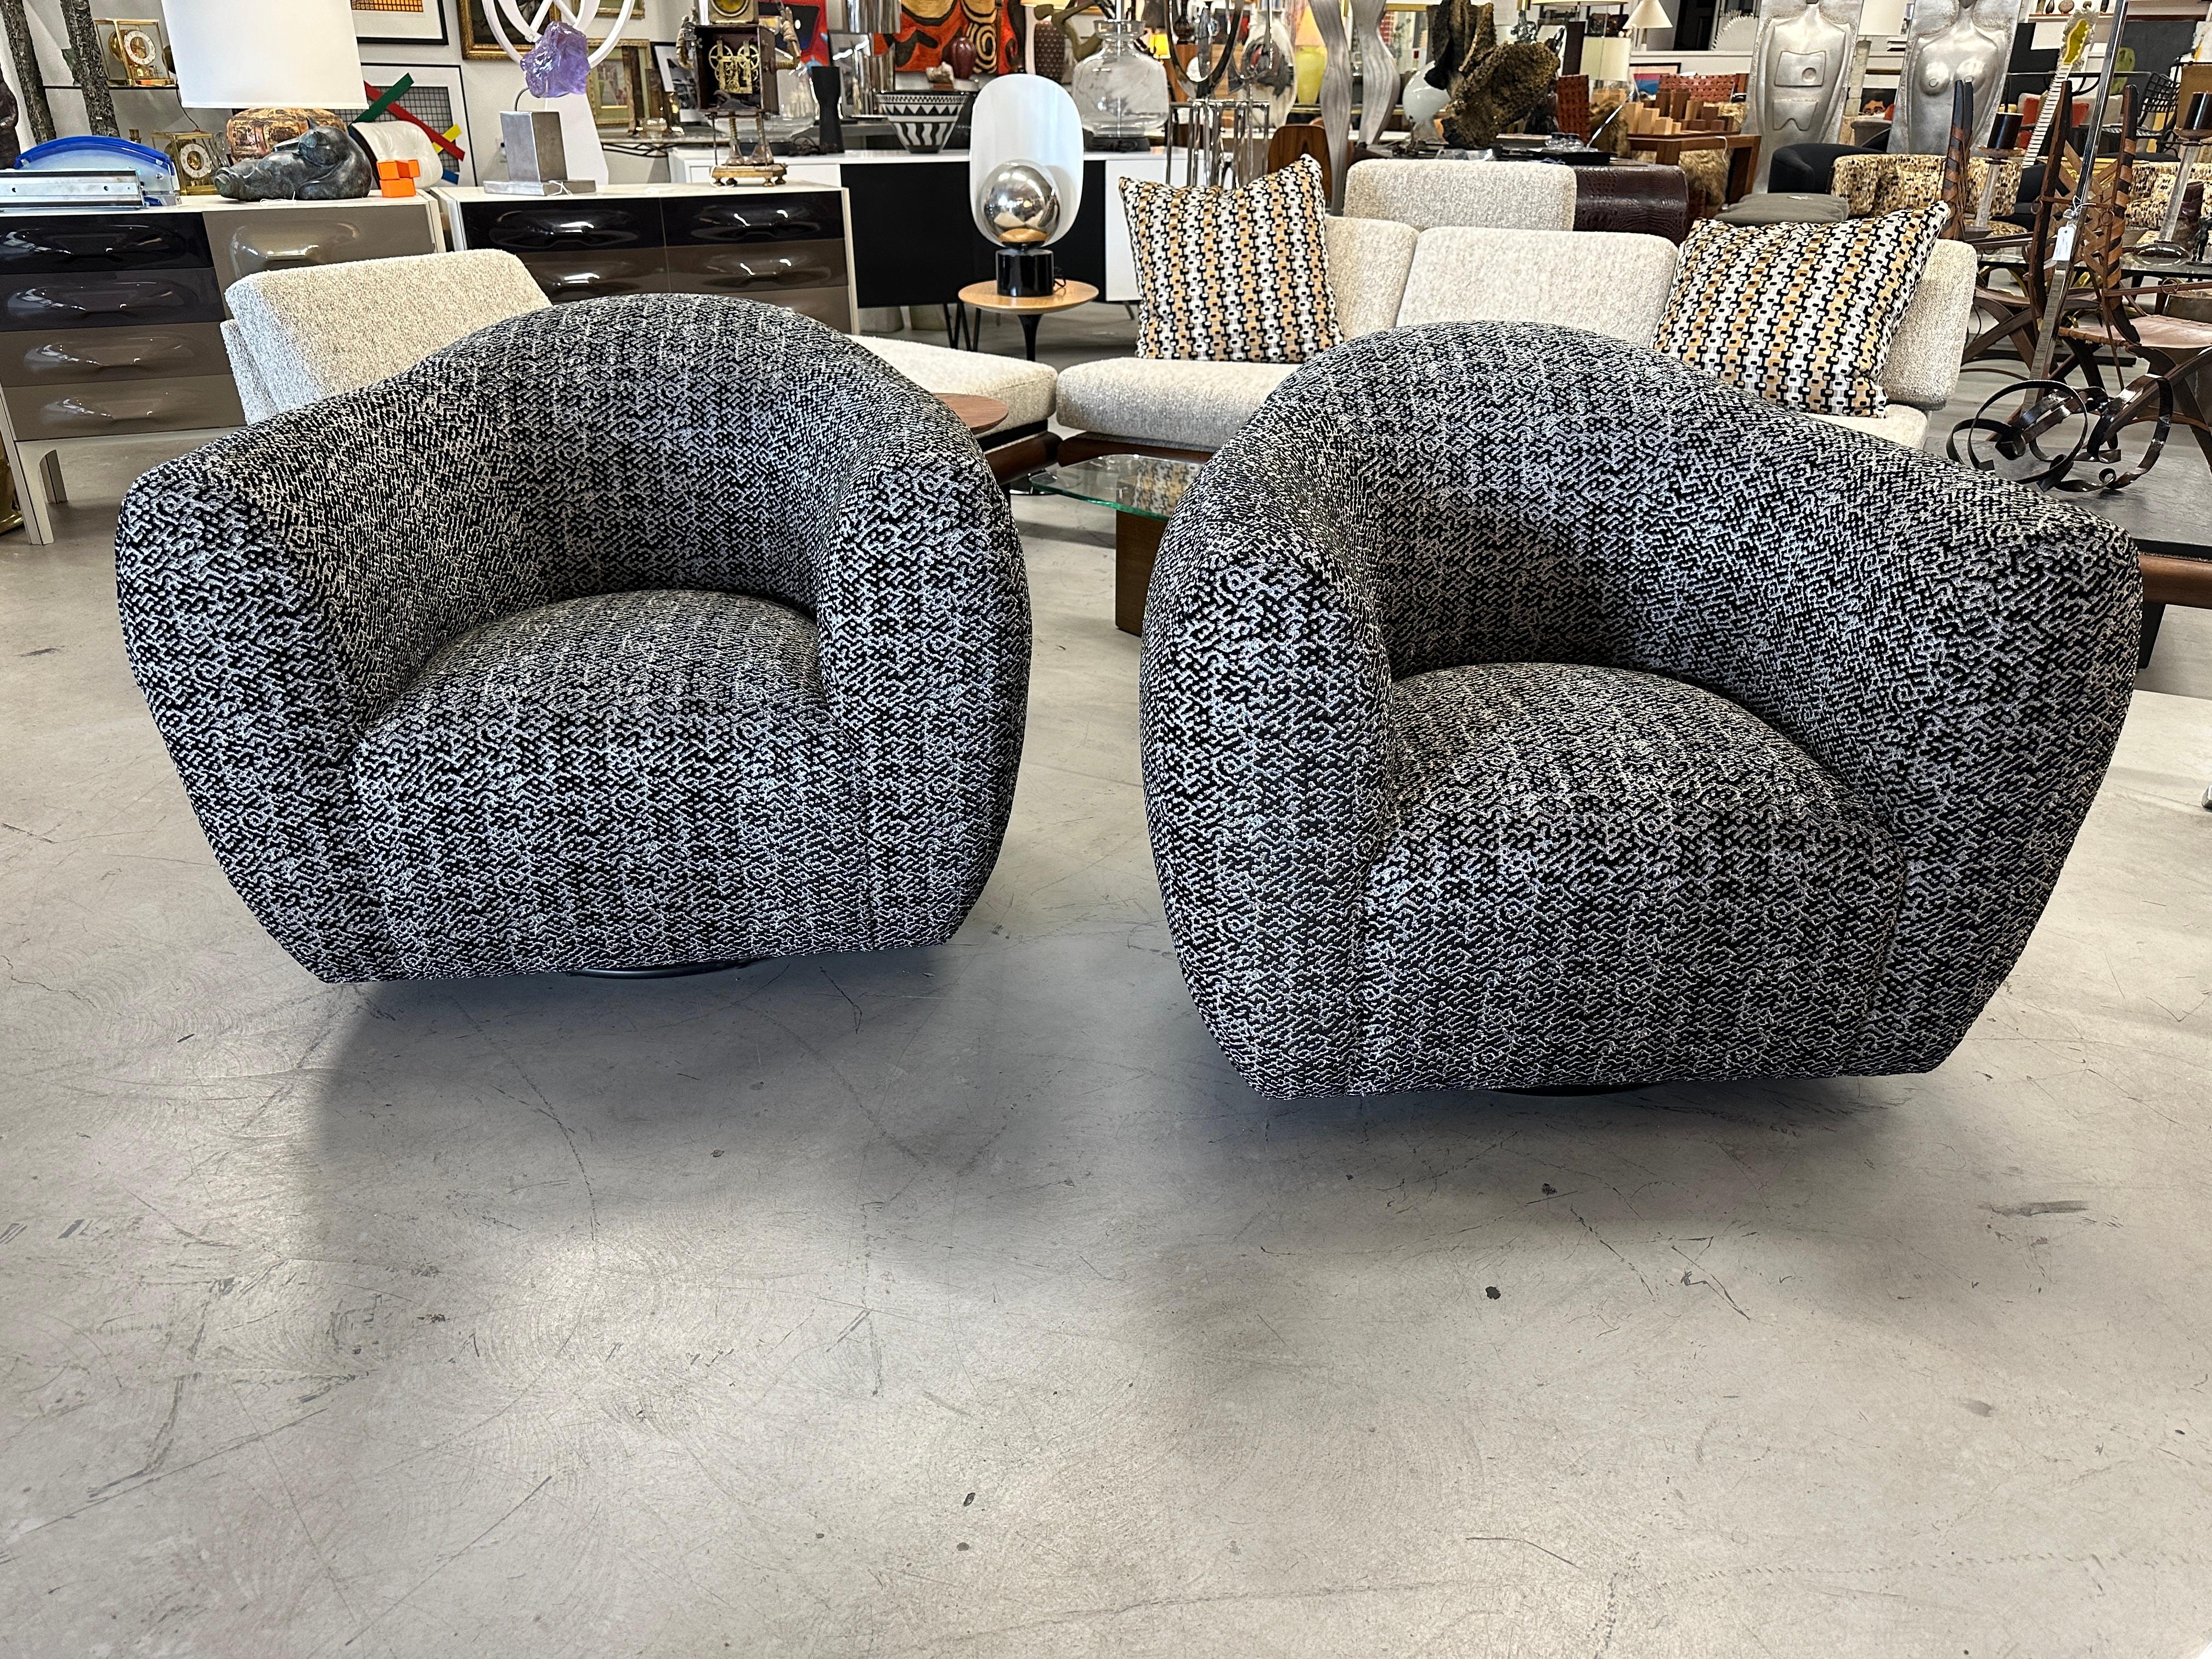 1980’s Vintage Oversized Swivel Chairs Reupholstered in Pollack/Weitzner Fabric For Sale 2